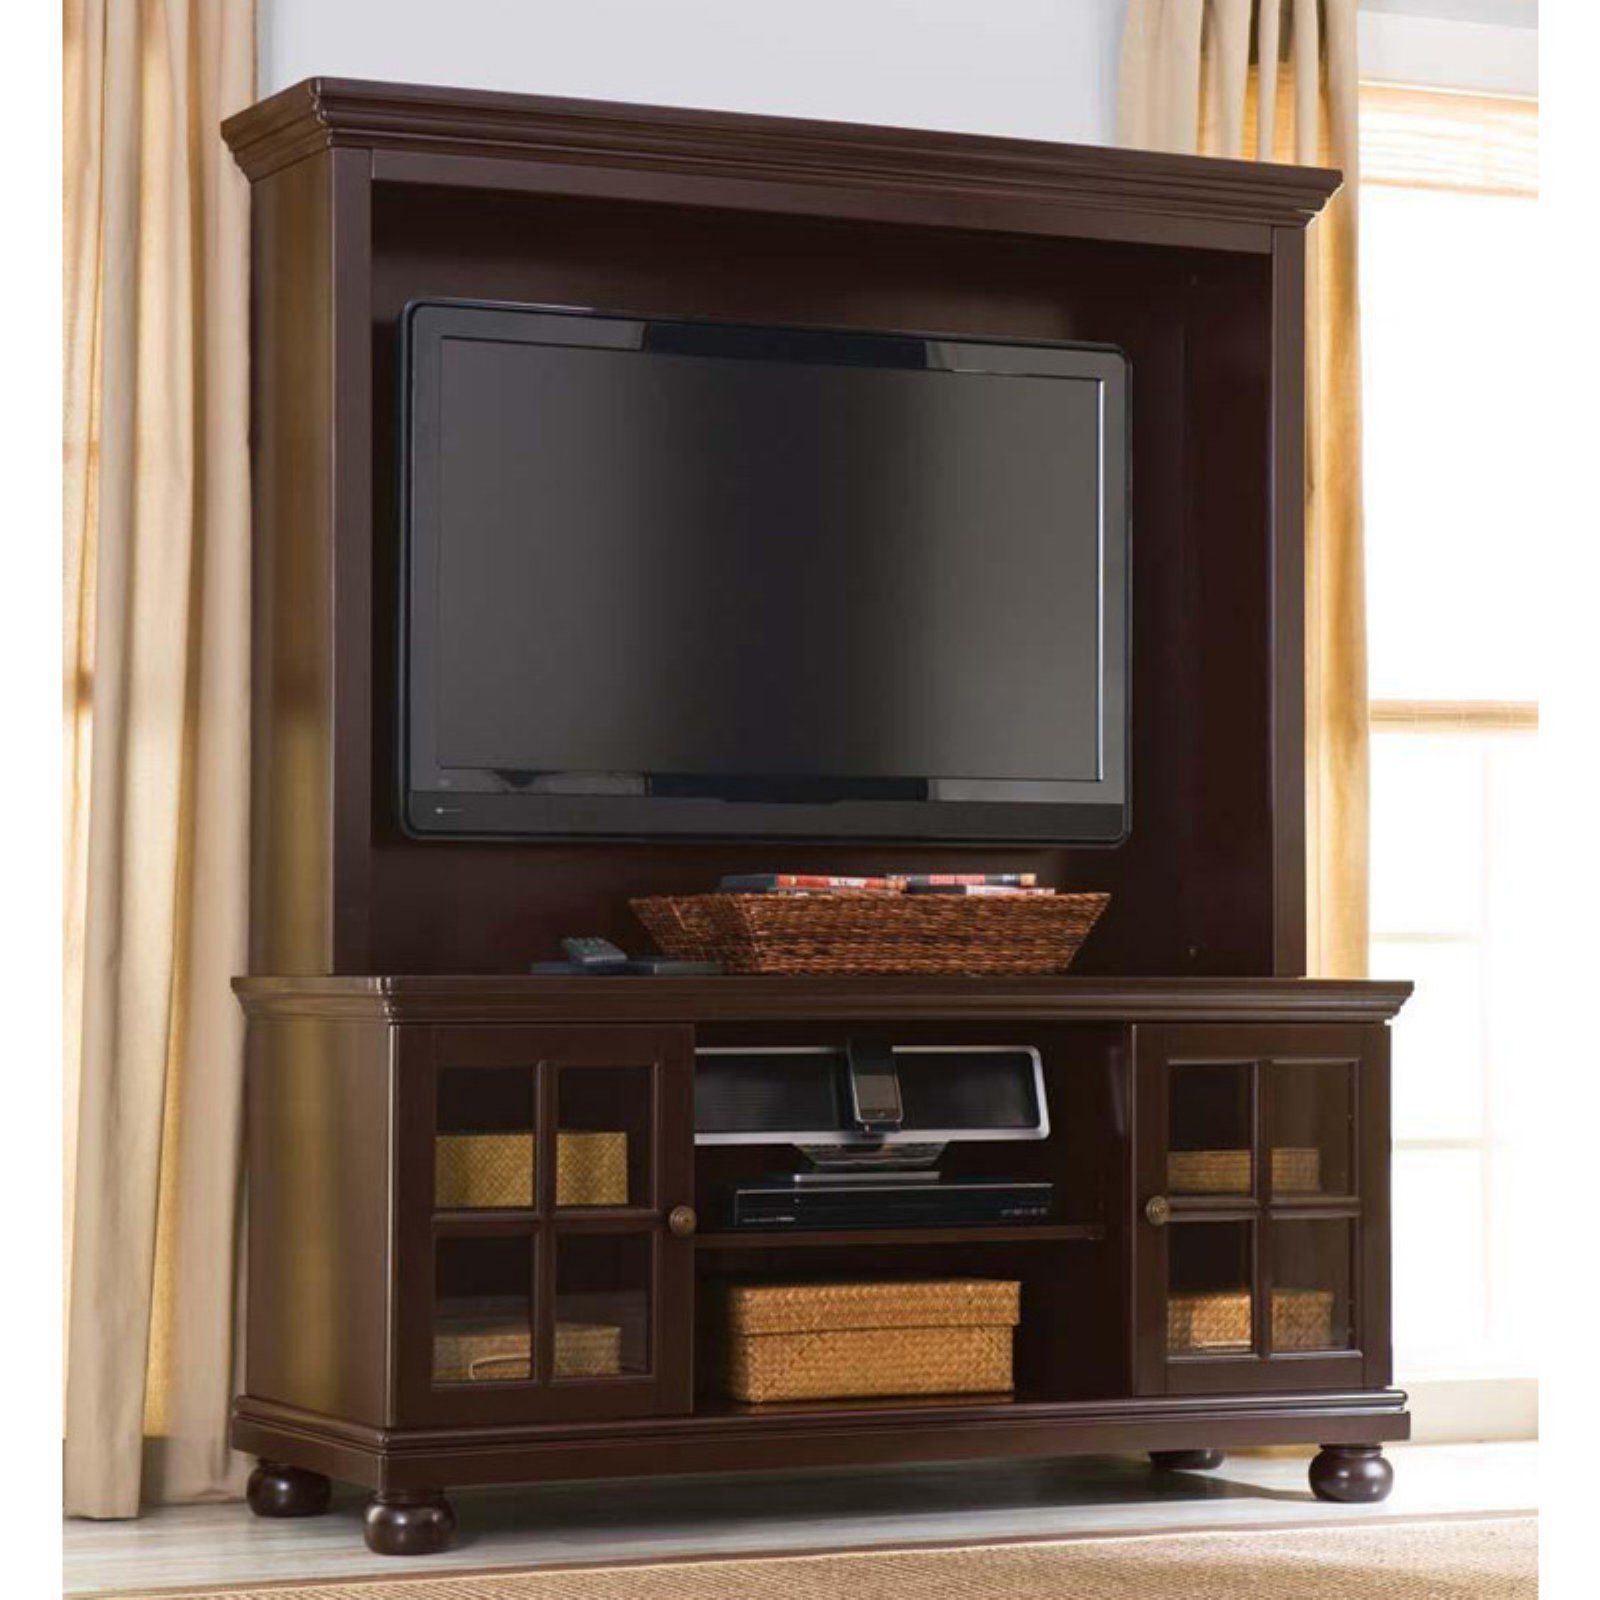 Better Home And Gardens 50" Flat Screen Tv Stand With Intended For Tv Stands For Tvs Up To 50" (View 5 of 20)